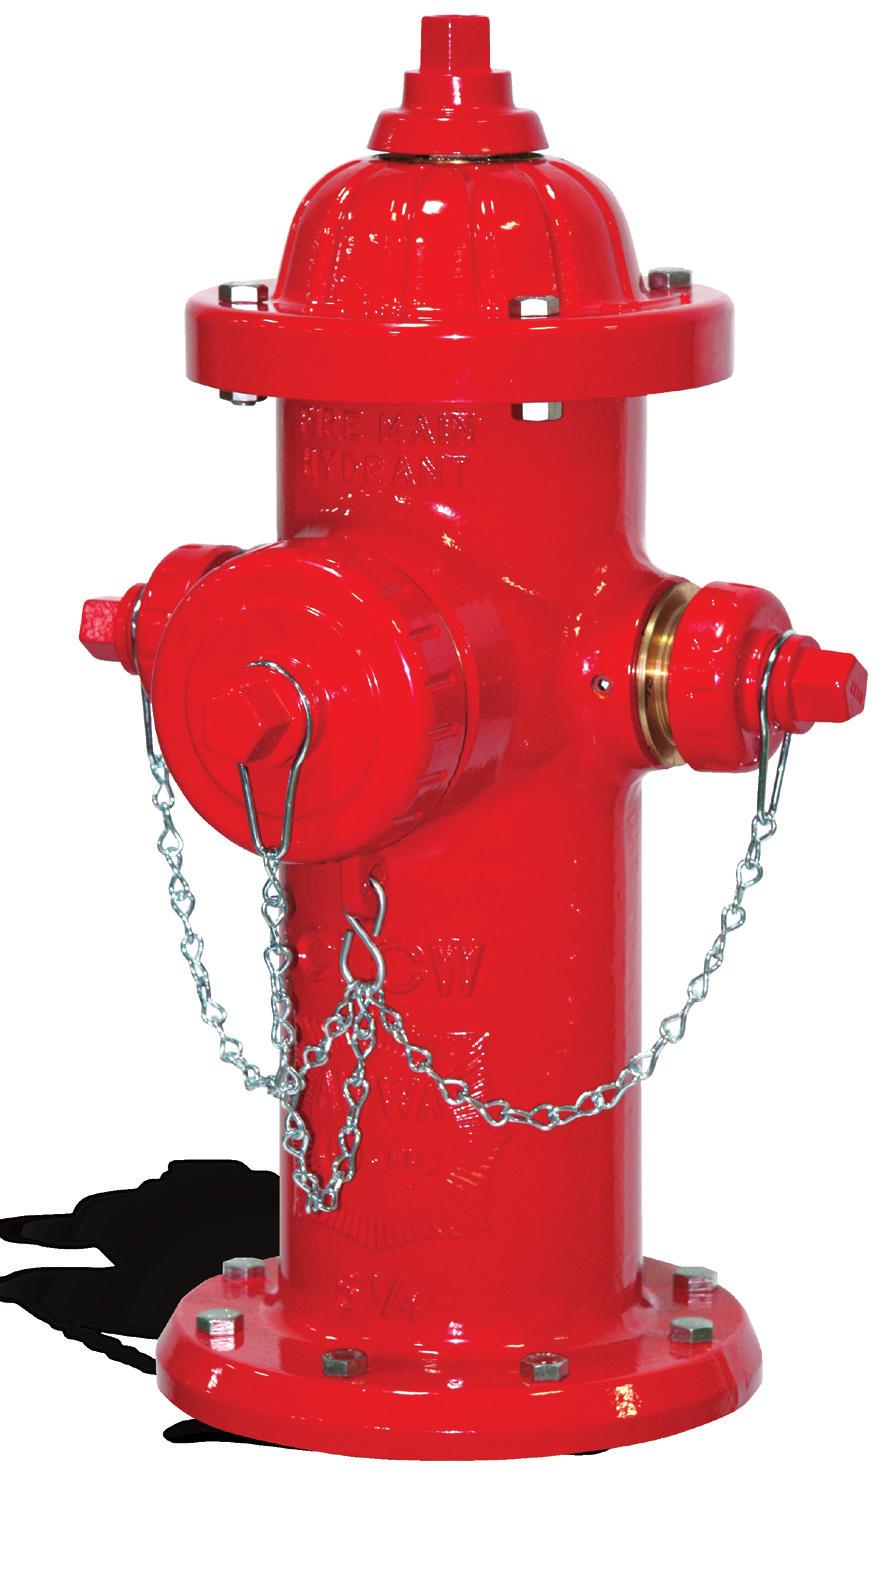 MEDALLION HYDRANT FIRE PROTECTION The Clow Medallion hydrant was designed and built to provide unsurpassed fire protection.